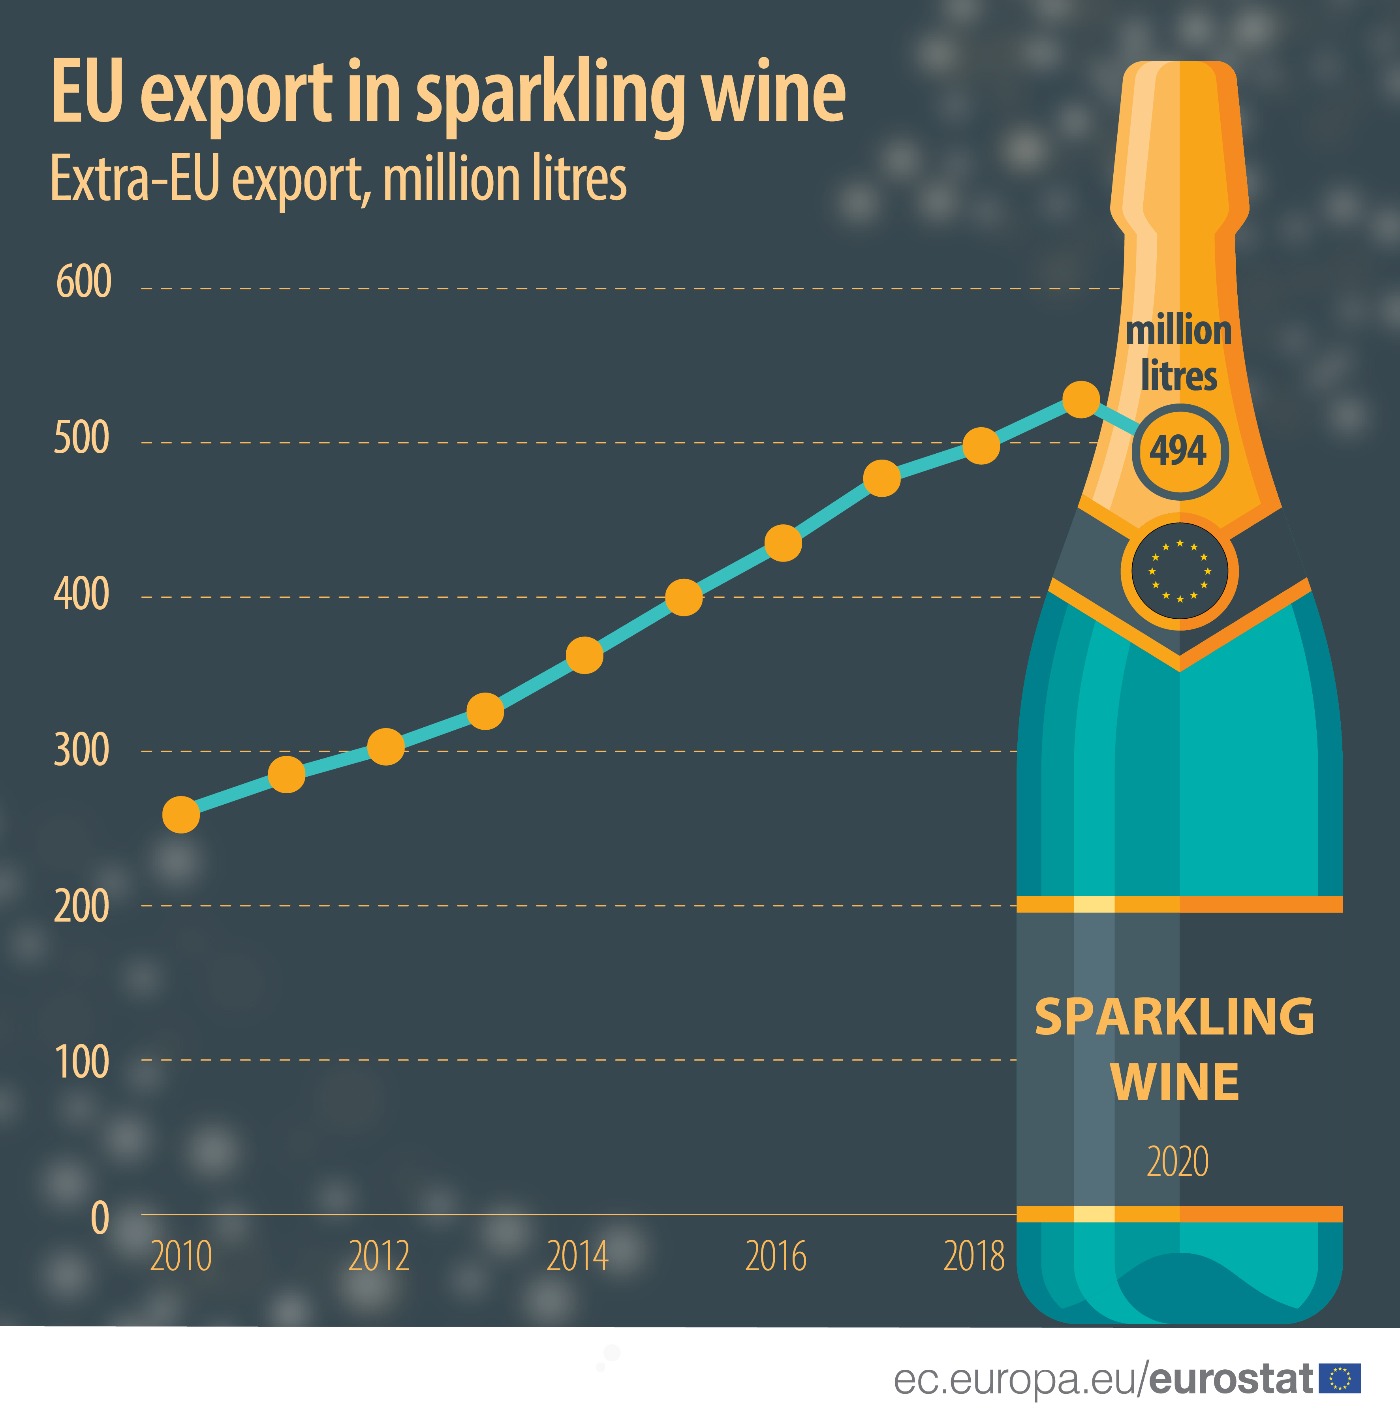 Line graph: Extra-EU export in sparkling wine, in million litres, from 2010 to 2020 